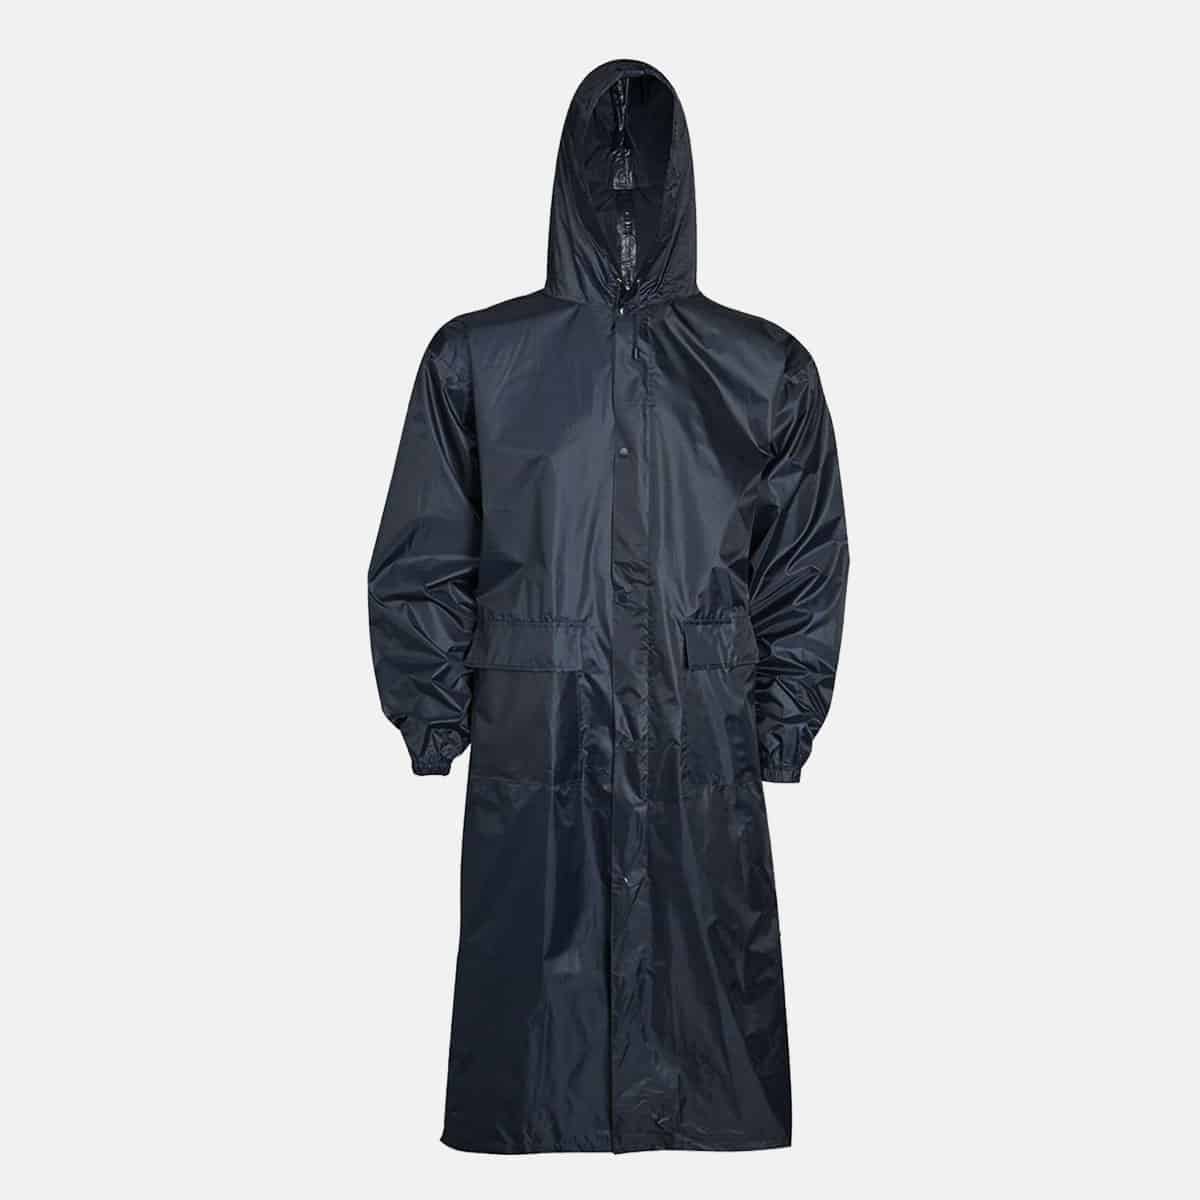 Adults Navy Blue Waterproof Long Coat by Baum Country